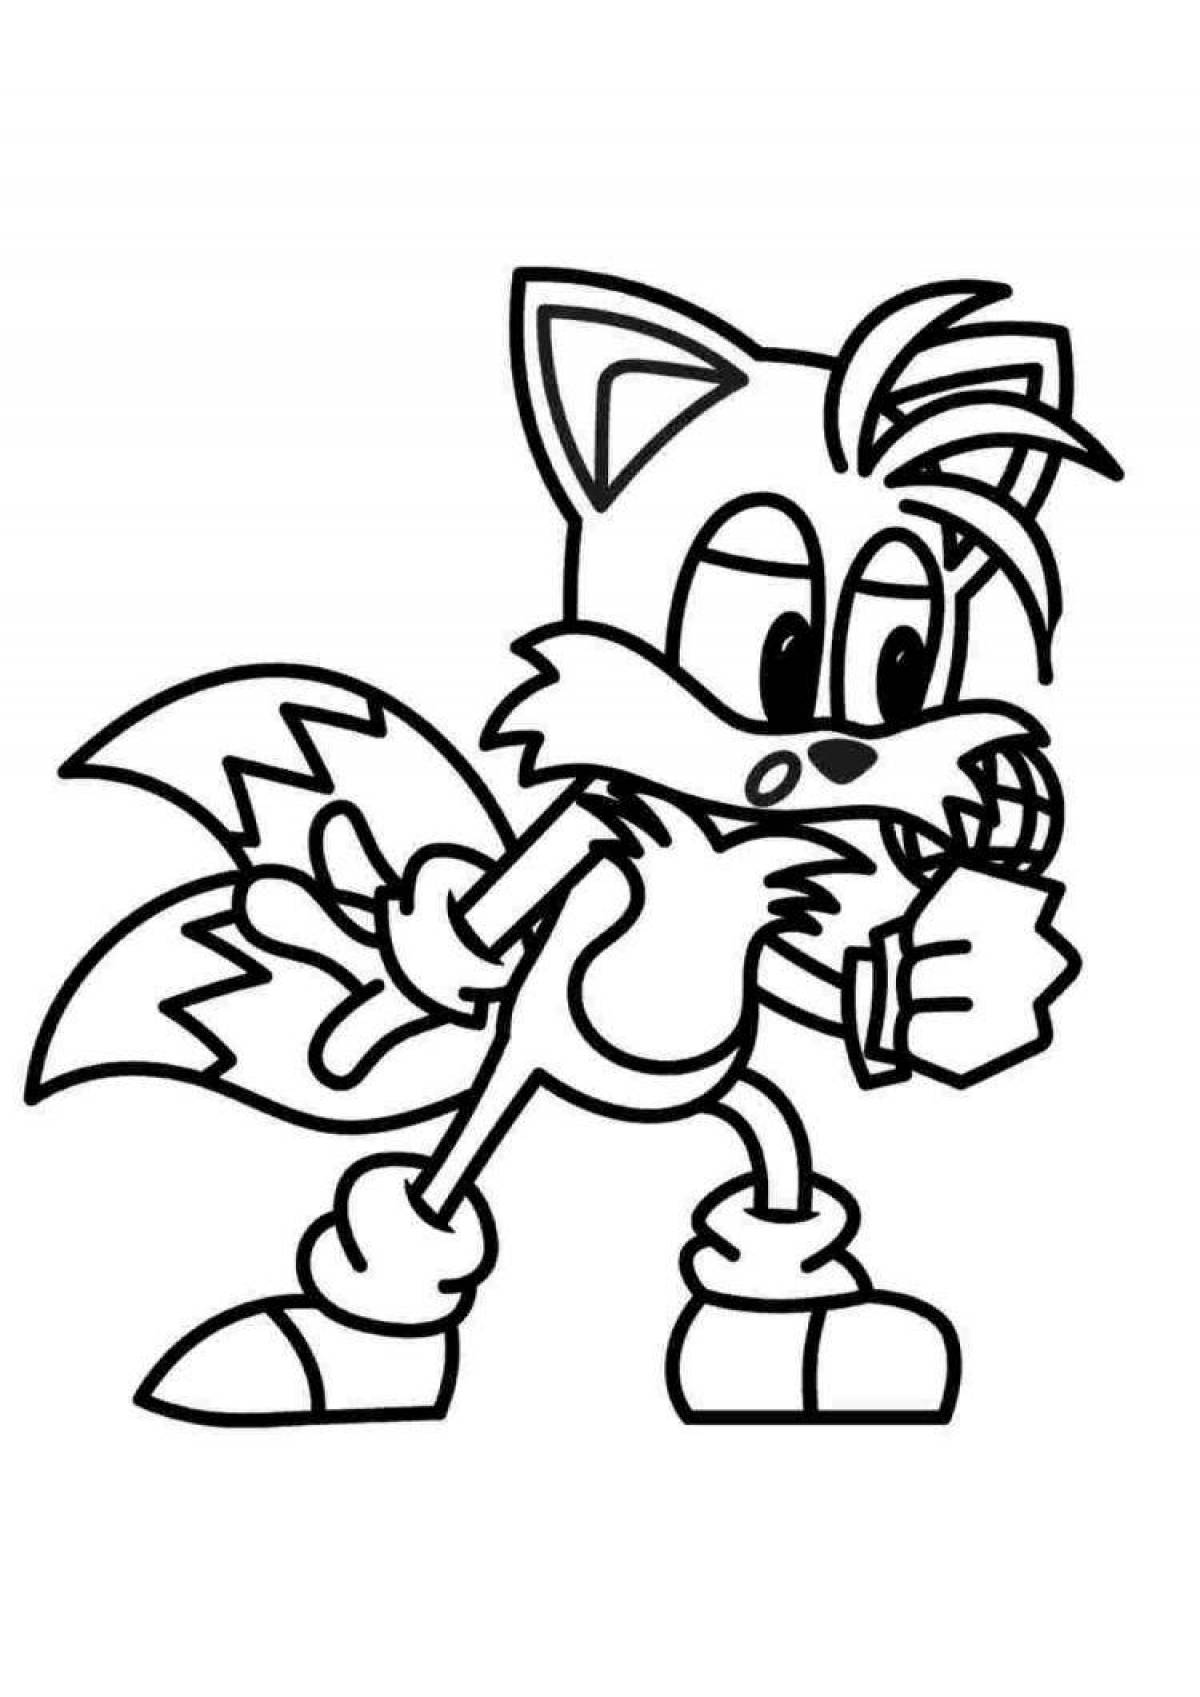 Sonic classic awesome coloring book